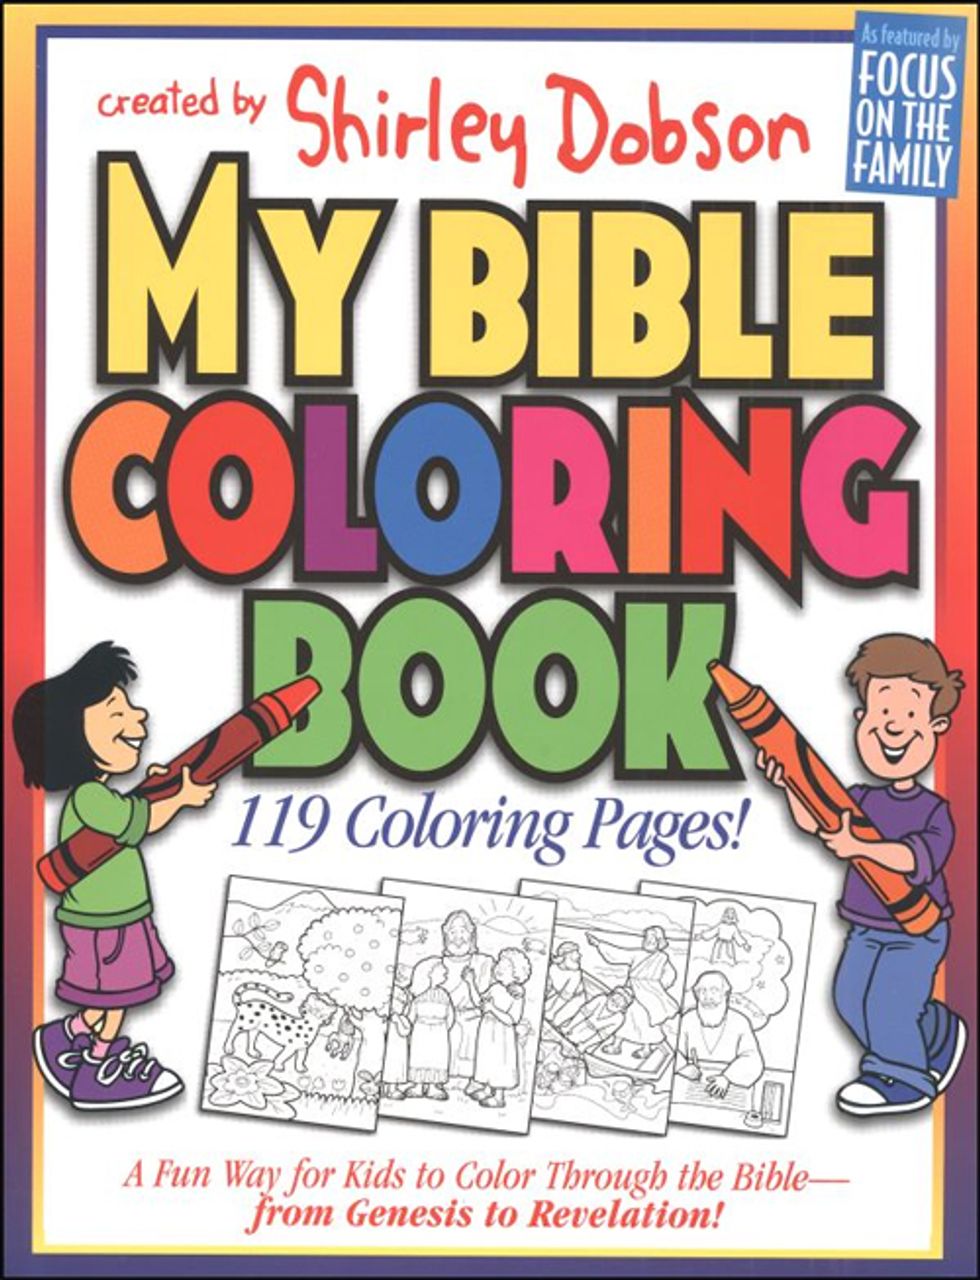 Trump To Be Sworn In Using Very Own Childhood Bible, Crayons